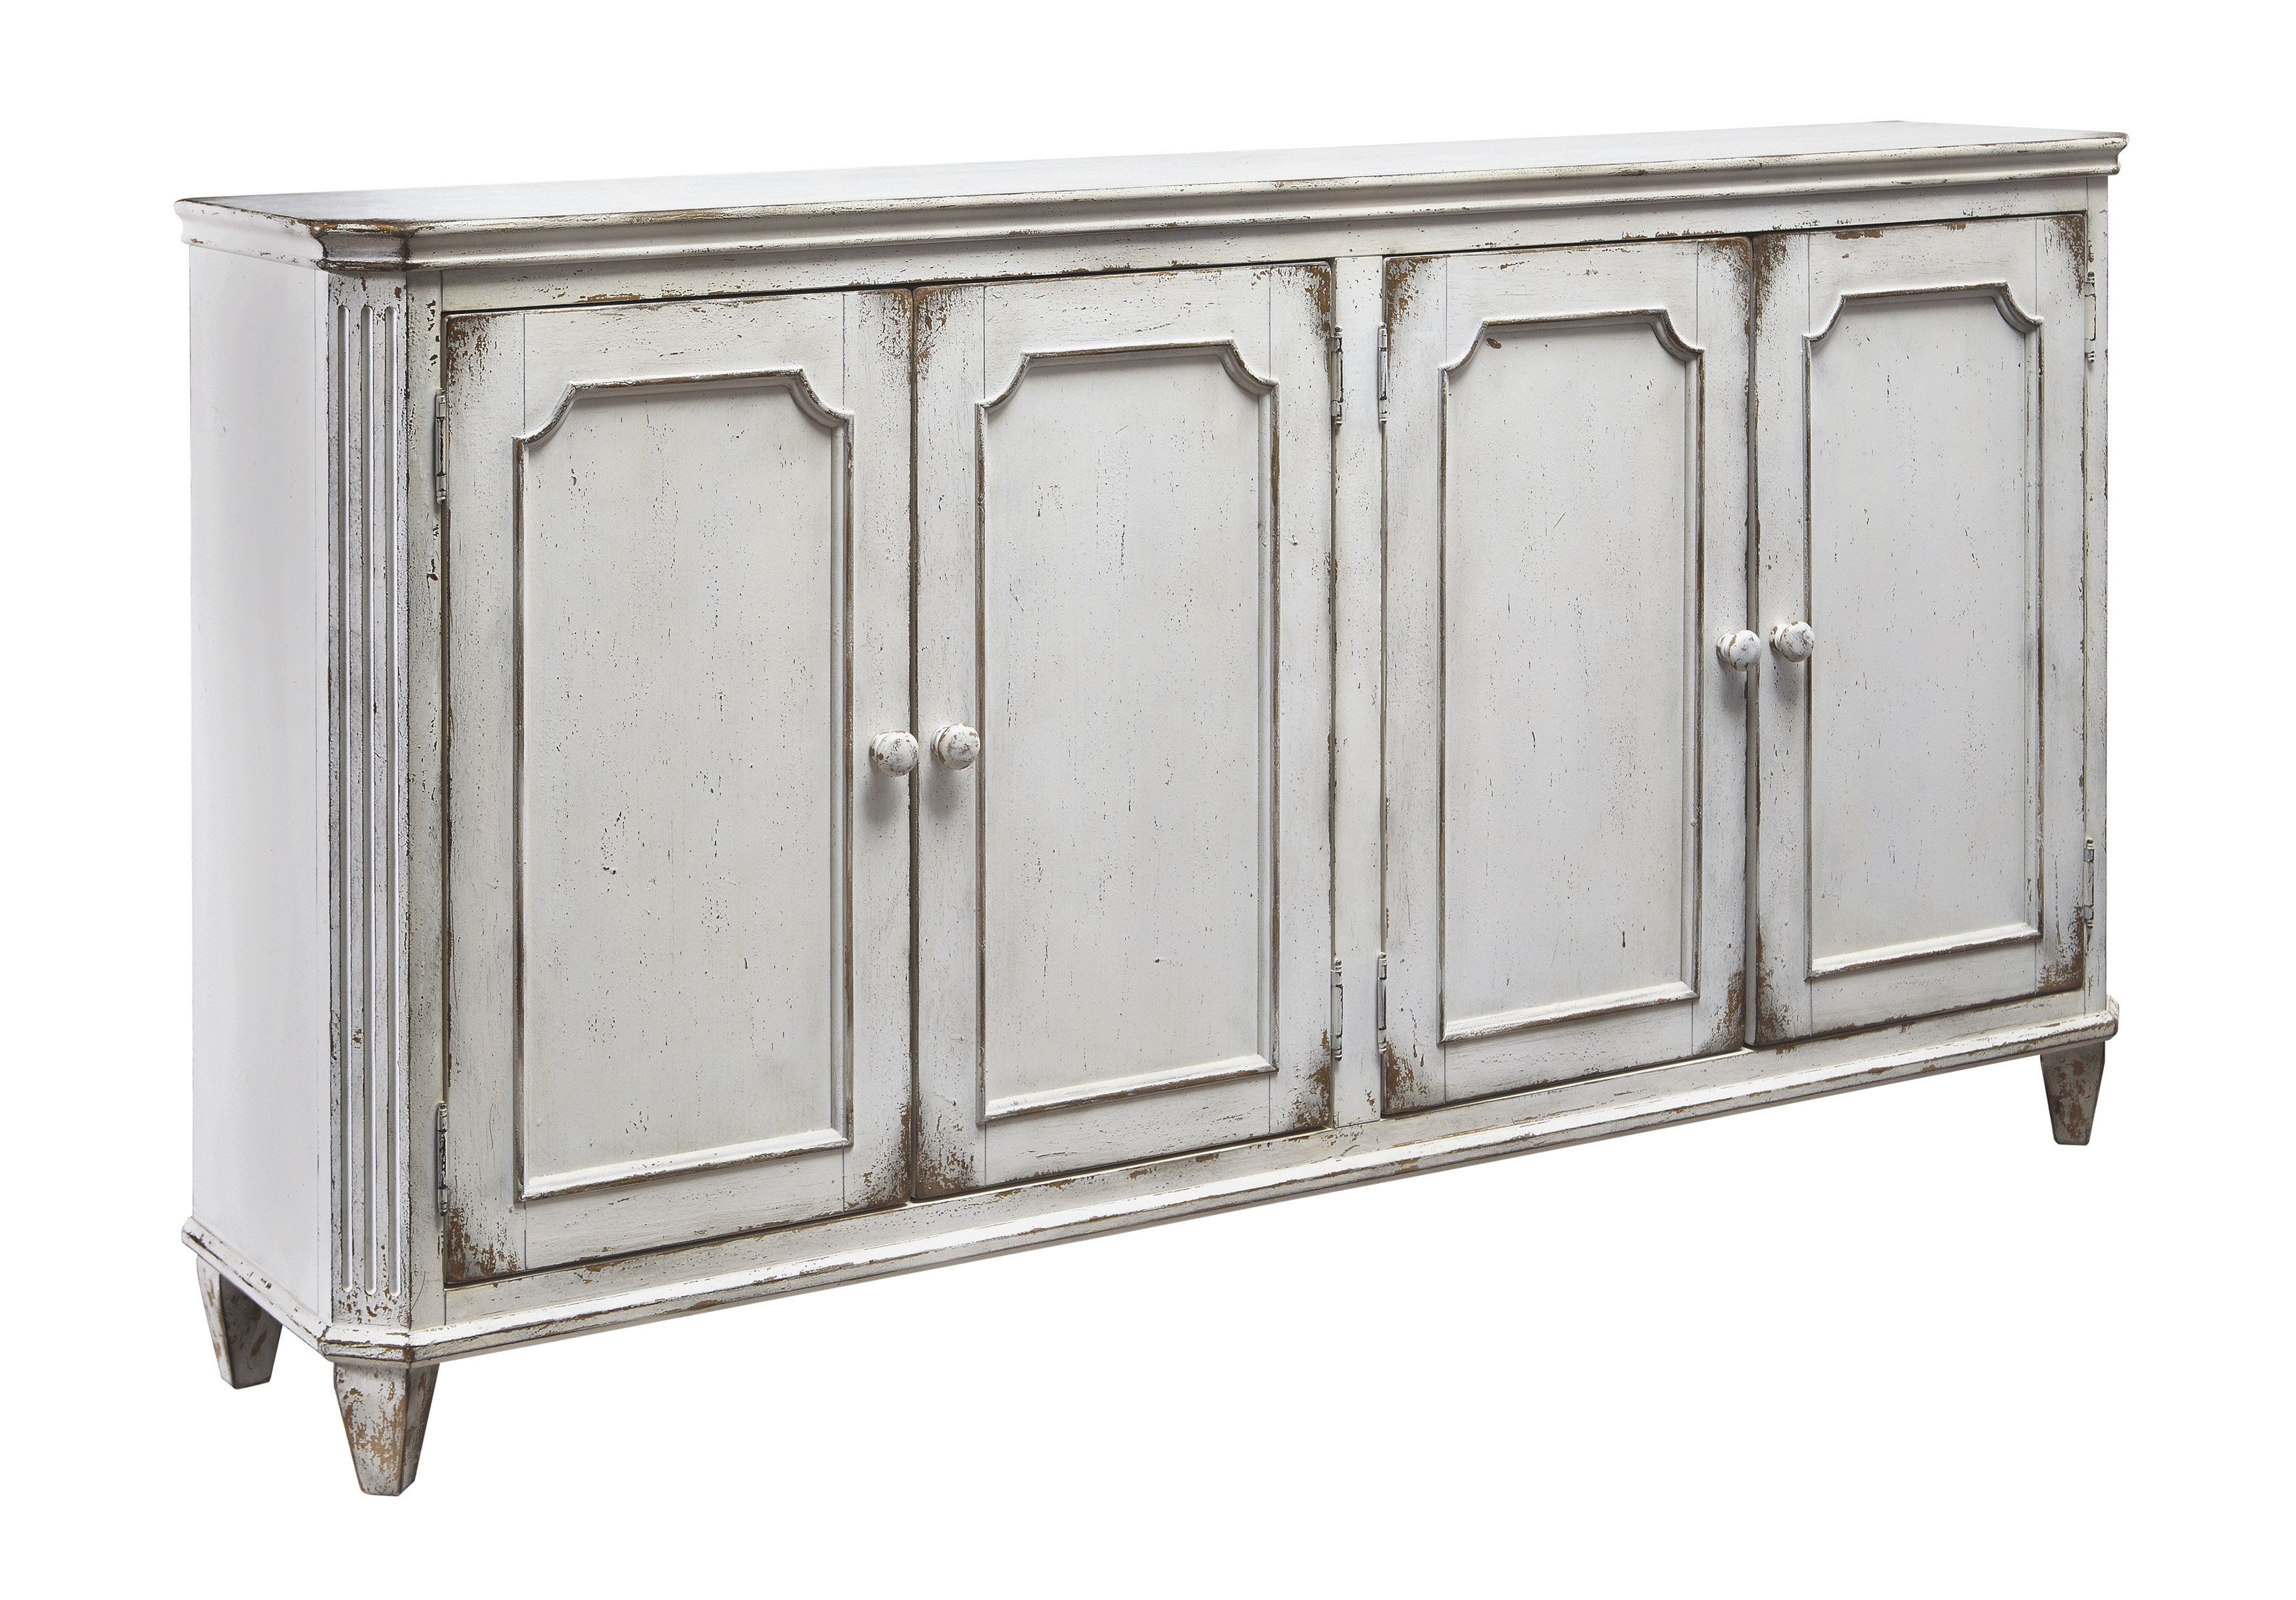 36 Inch Sideboard | Wayfair With Current Avenal Sideboards (View 17 of 20)